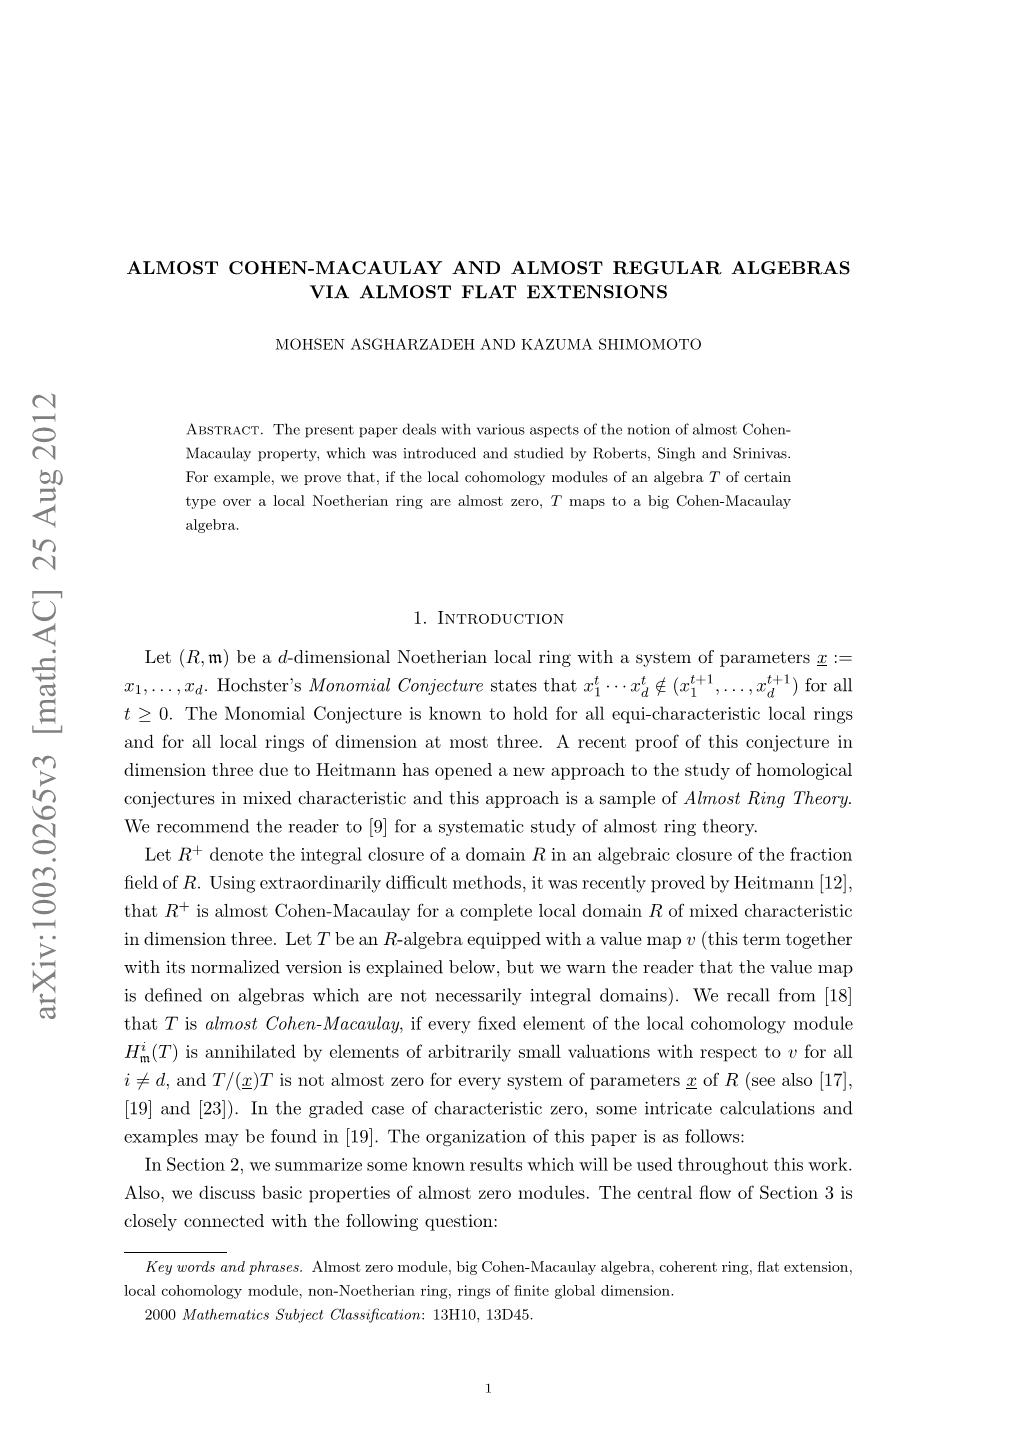 Almost Cohen-Macaulay and Almost Regular Algebras Via Almost Flat Extensions3